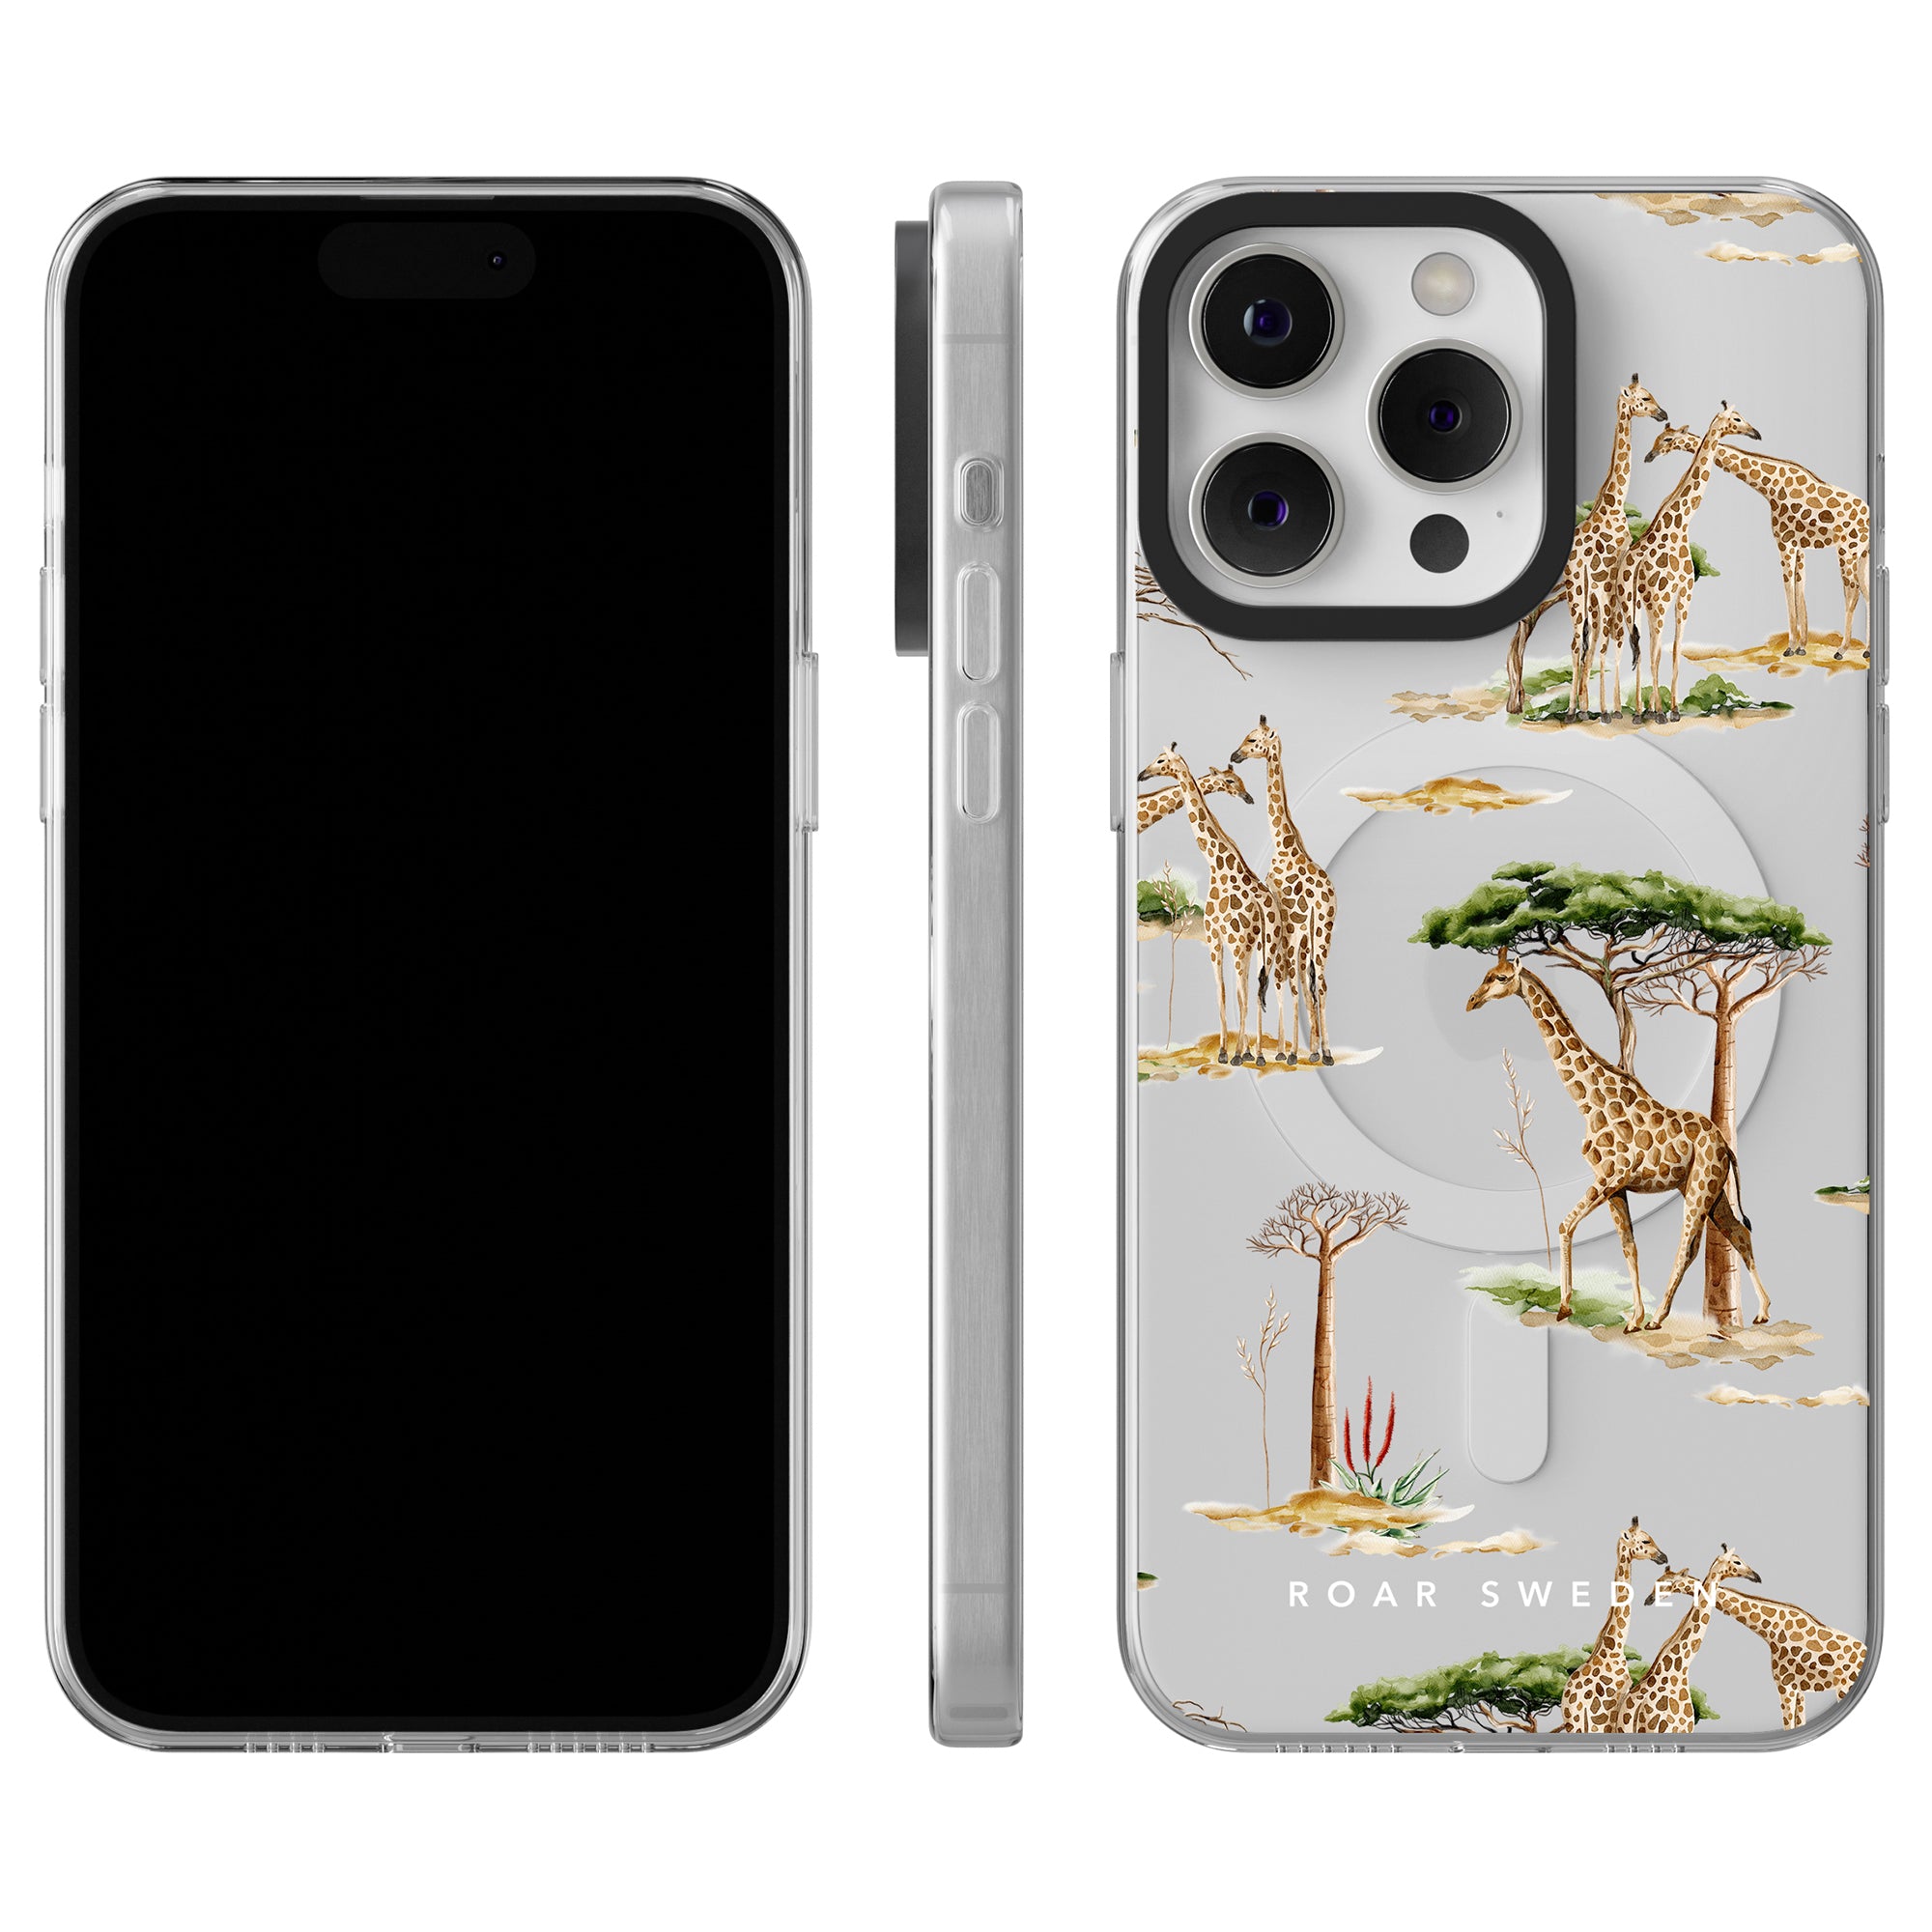 A smartphone next to a Giraffa - MagSafe Case decorated with giraffes, trees, and a blommig design, viewed from front, side, and back. The case is branded "ROAR SWEDEN.